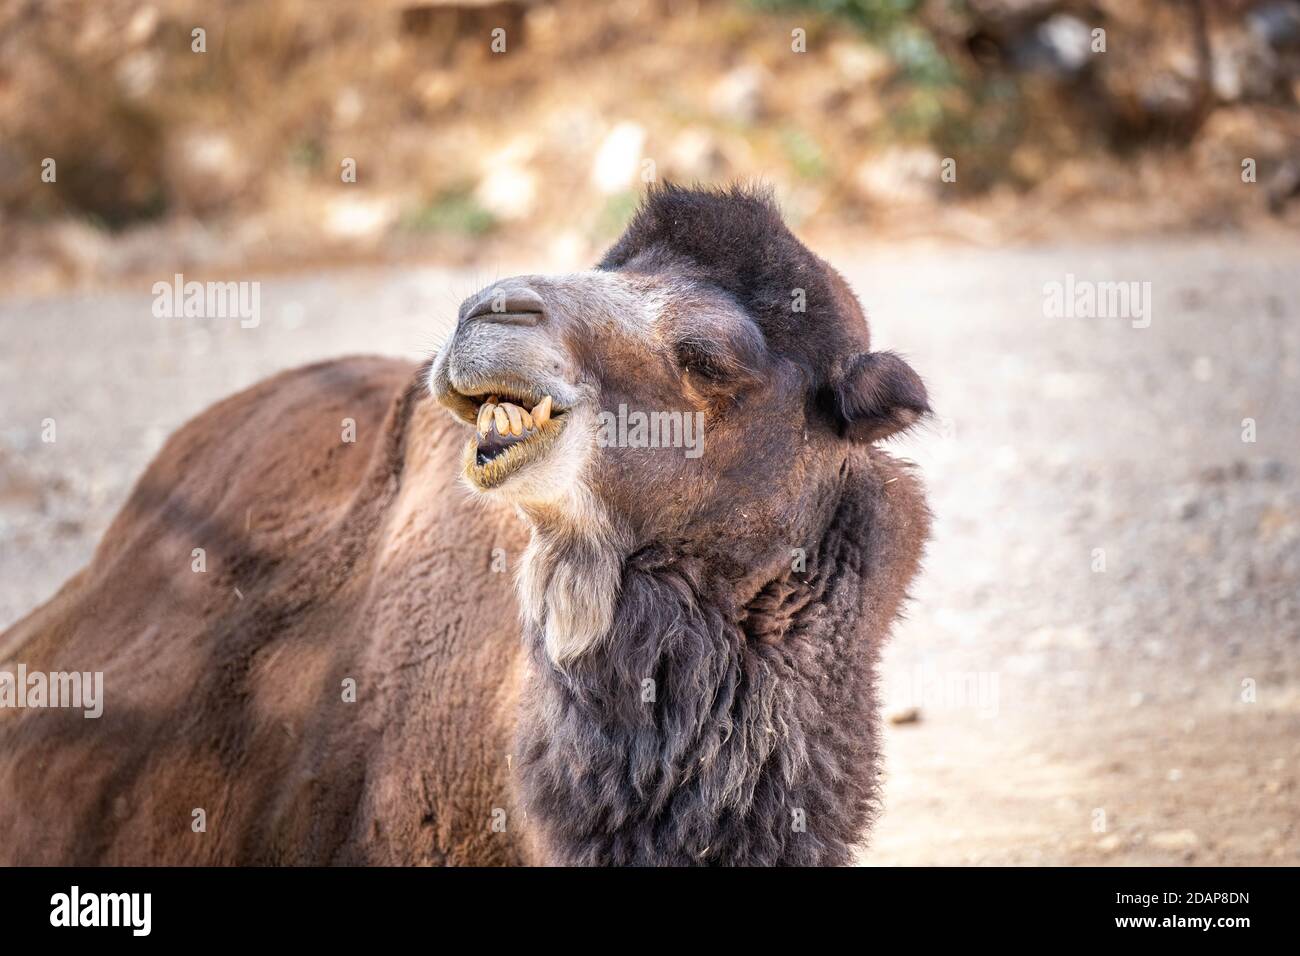 Portrait of a camel with a funny face. Bactrian camel, held captive in a zoo. Brown fur. Attica Zoological Park. Stock Photo